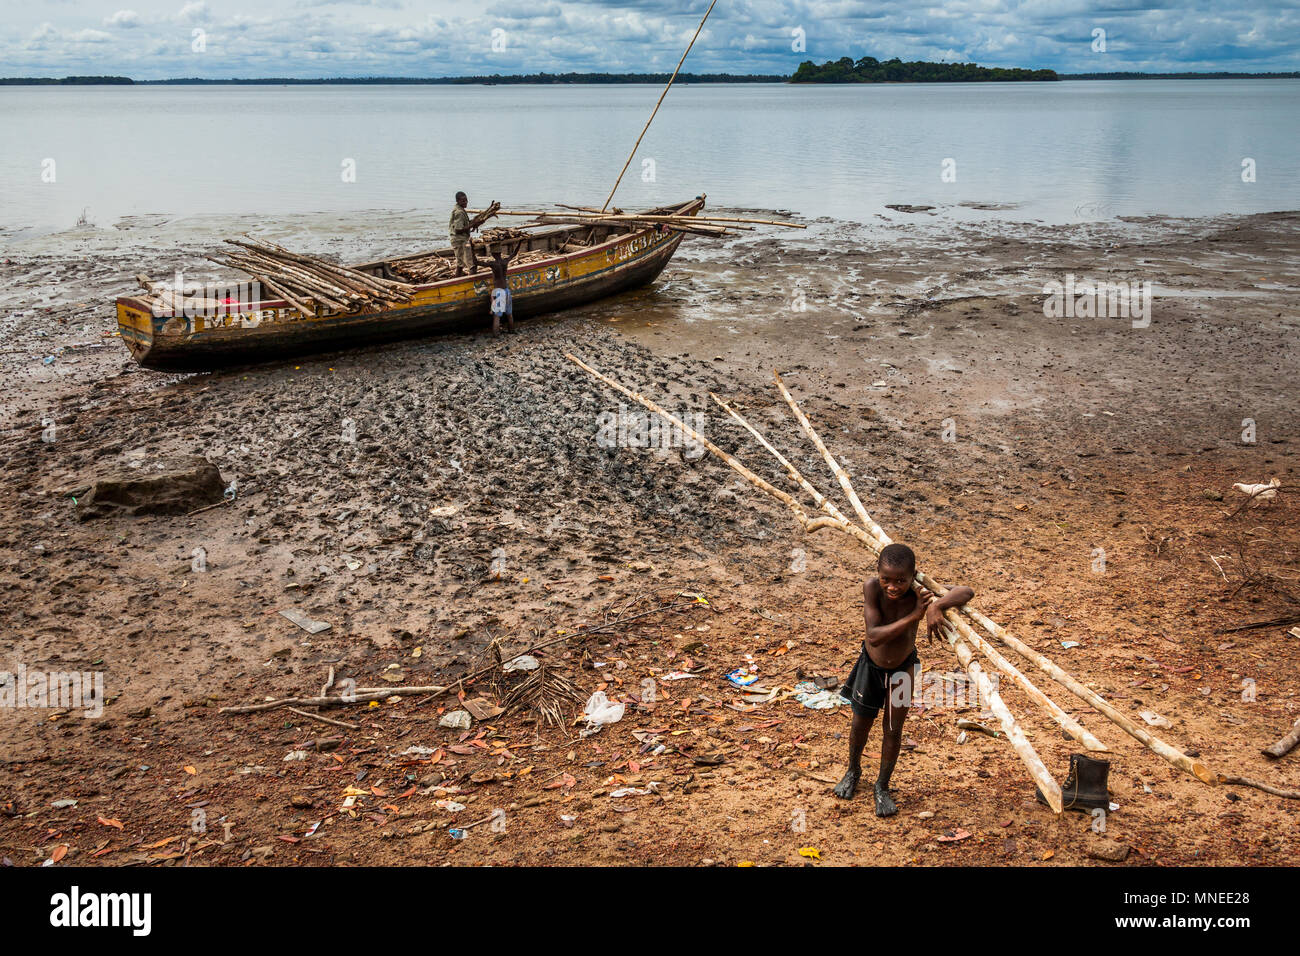 Bunce Island, Sierra Leone - June 02, 2013: West Africa, unknown fisherman unloads the material from the dock, Bunce Island was a British slave tradin Stock Photo